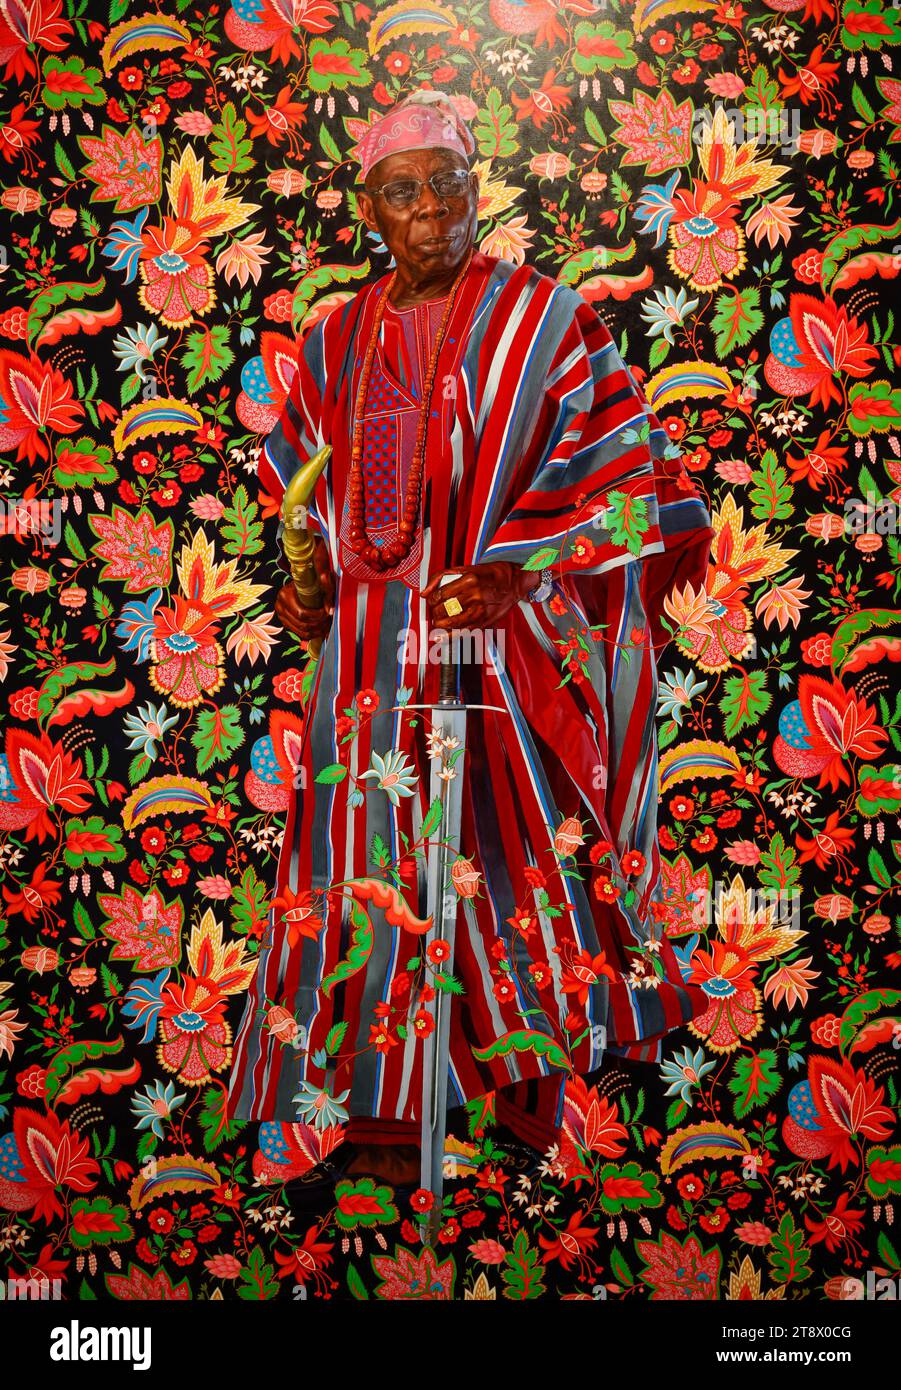 KEHINDE WILEY EXHIBITION AT THE MUSEE DU QUAI BRANLY: A PICTORIAL JOURNEY THROUGH AFRICAN POWER Stock Photo